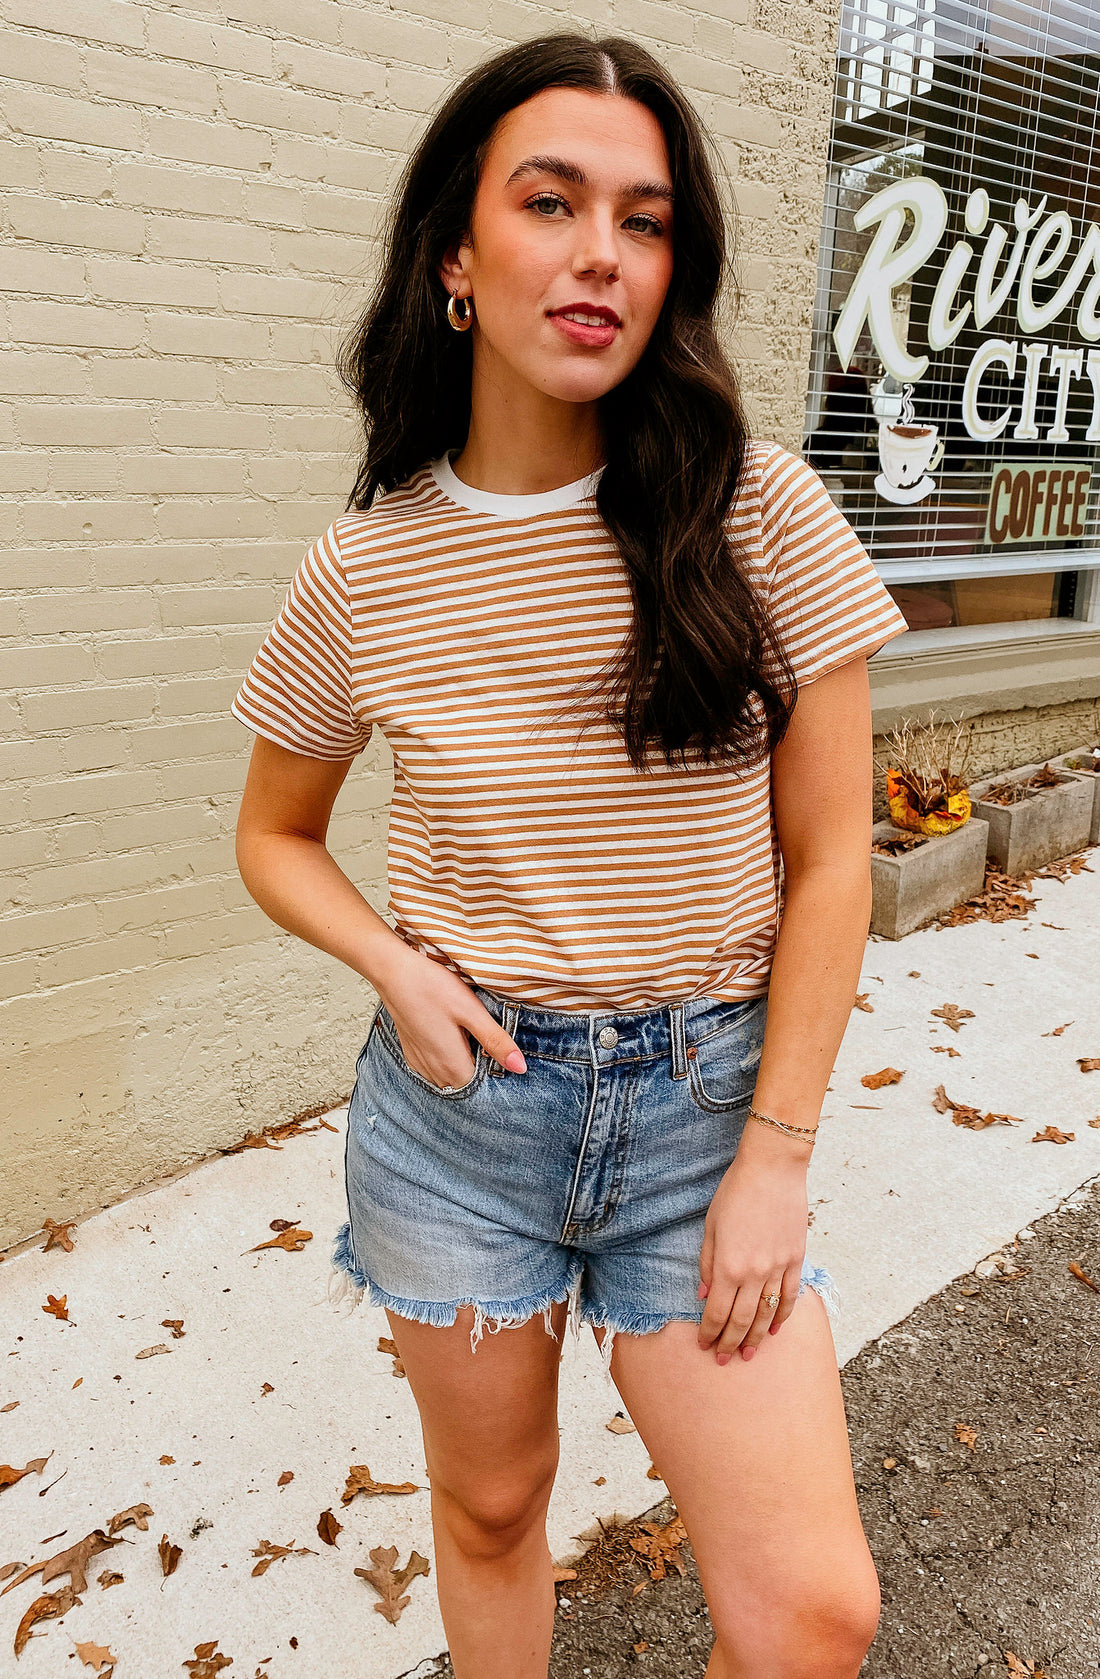 THE ULTIMATE STRIPE KNIT TEE